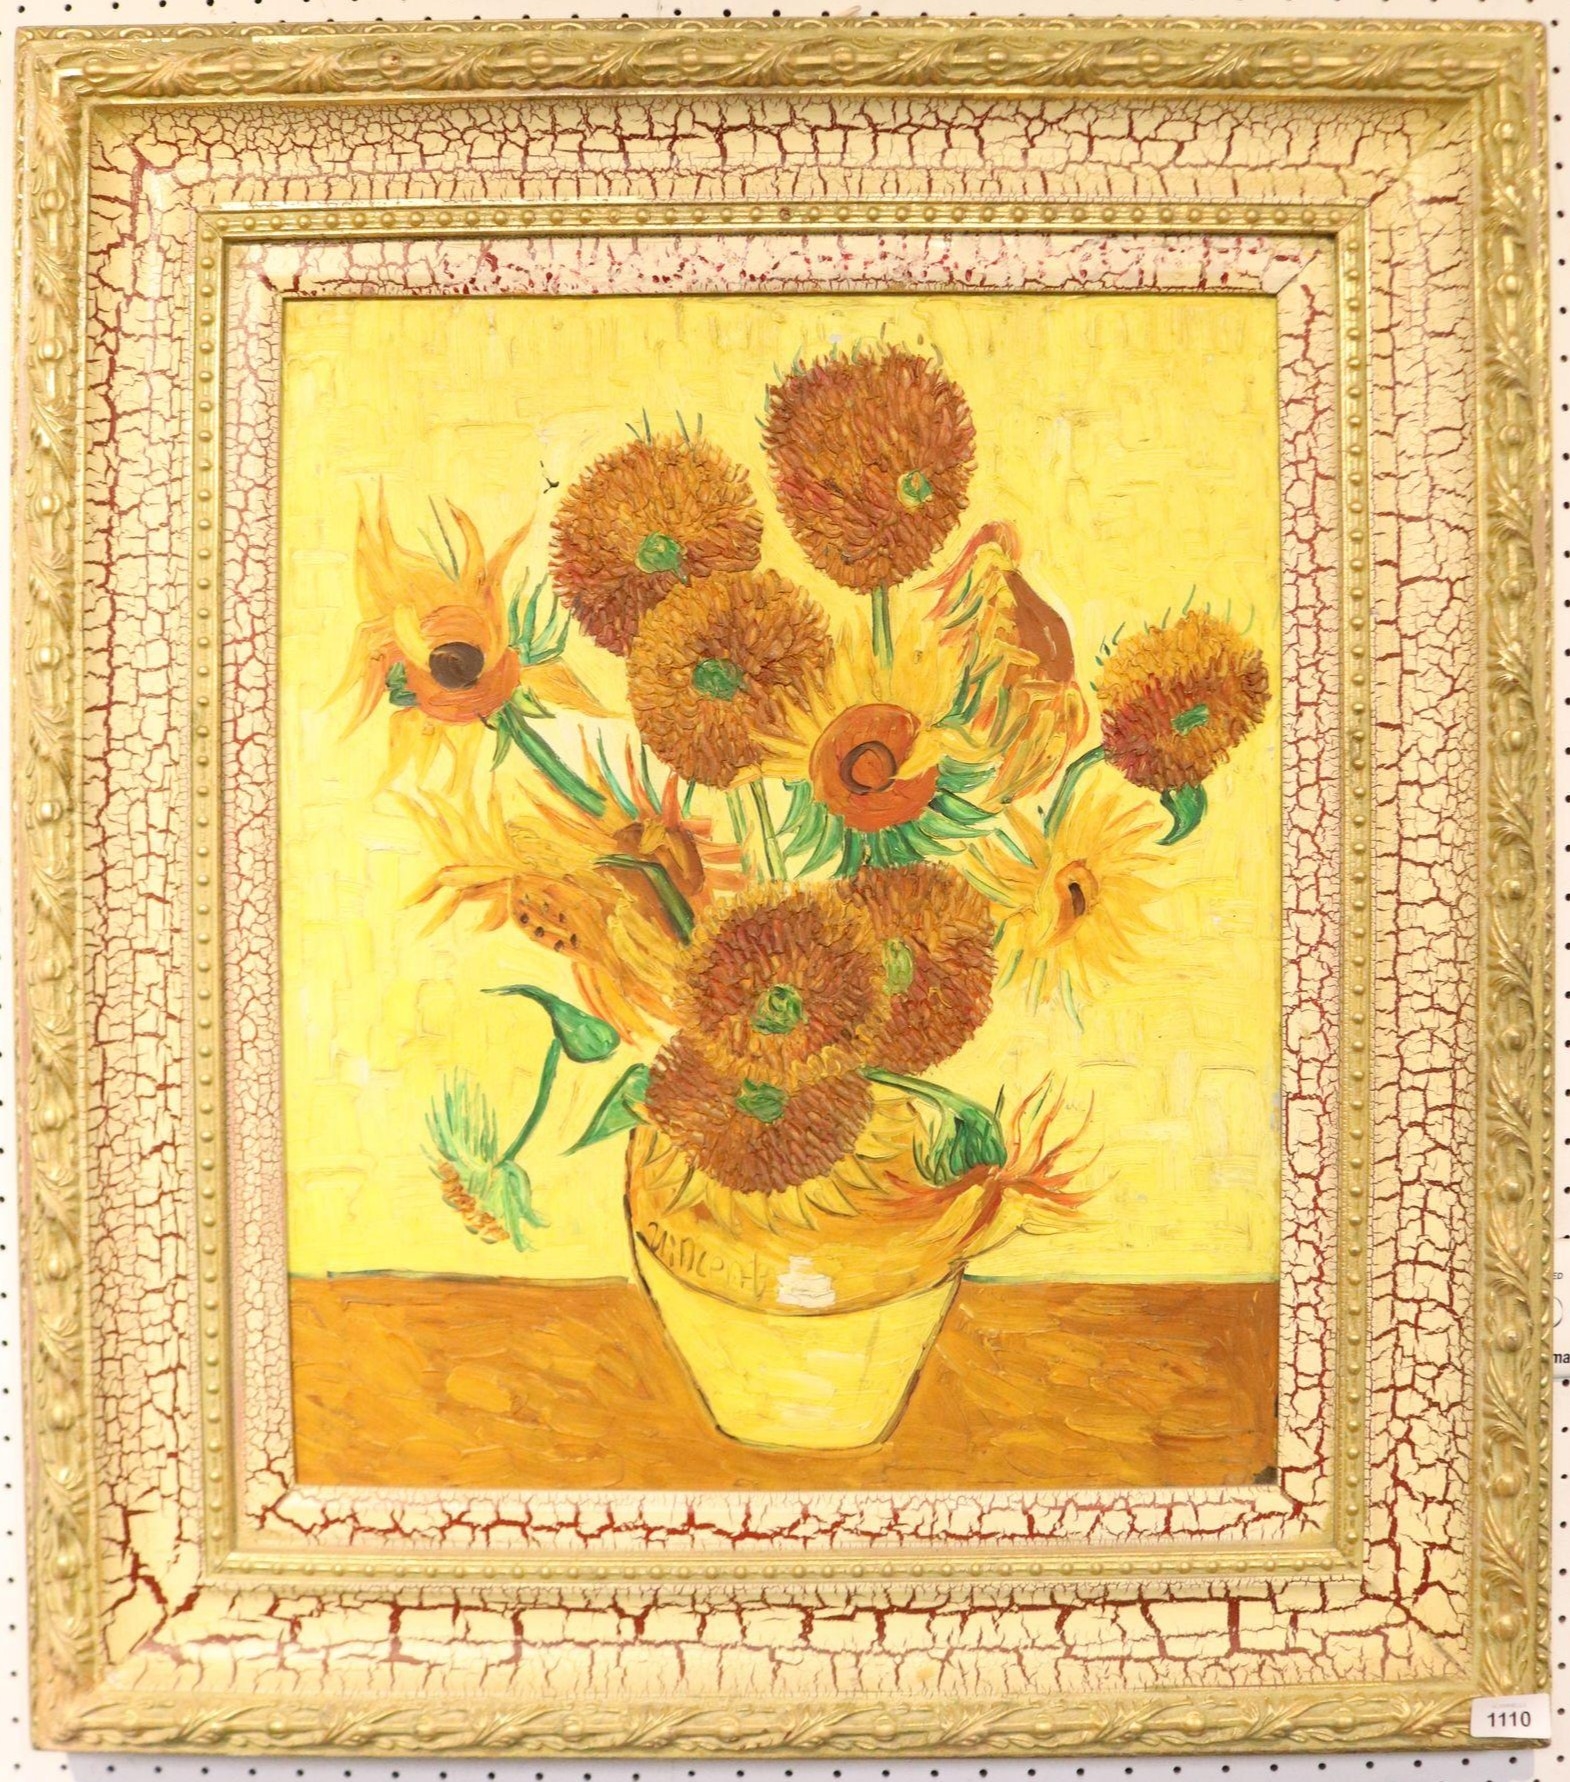 Copy of Sunflowers by Van Gogh by Vincent van Gogh